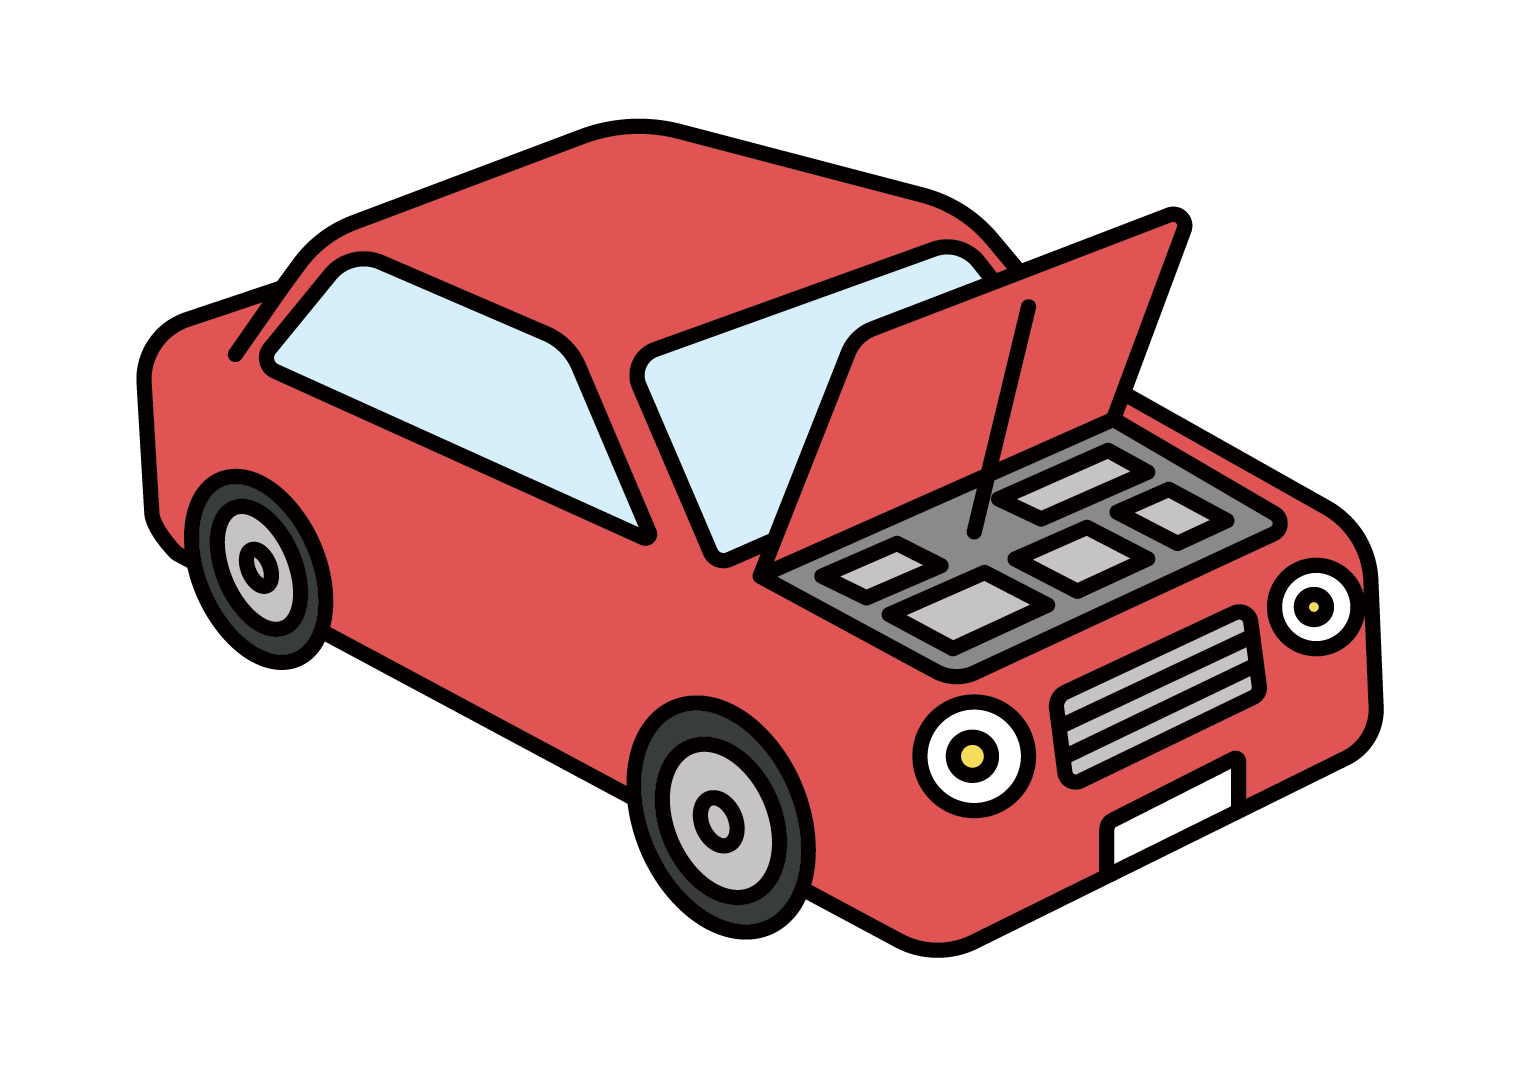 Illustration of a car with the hood open